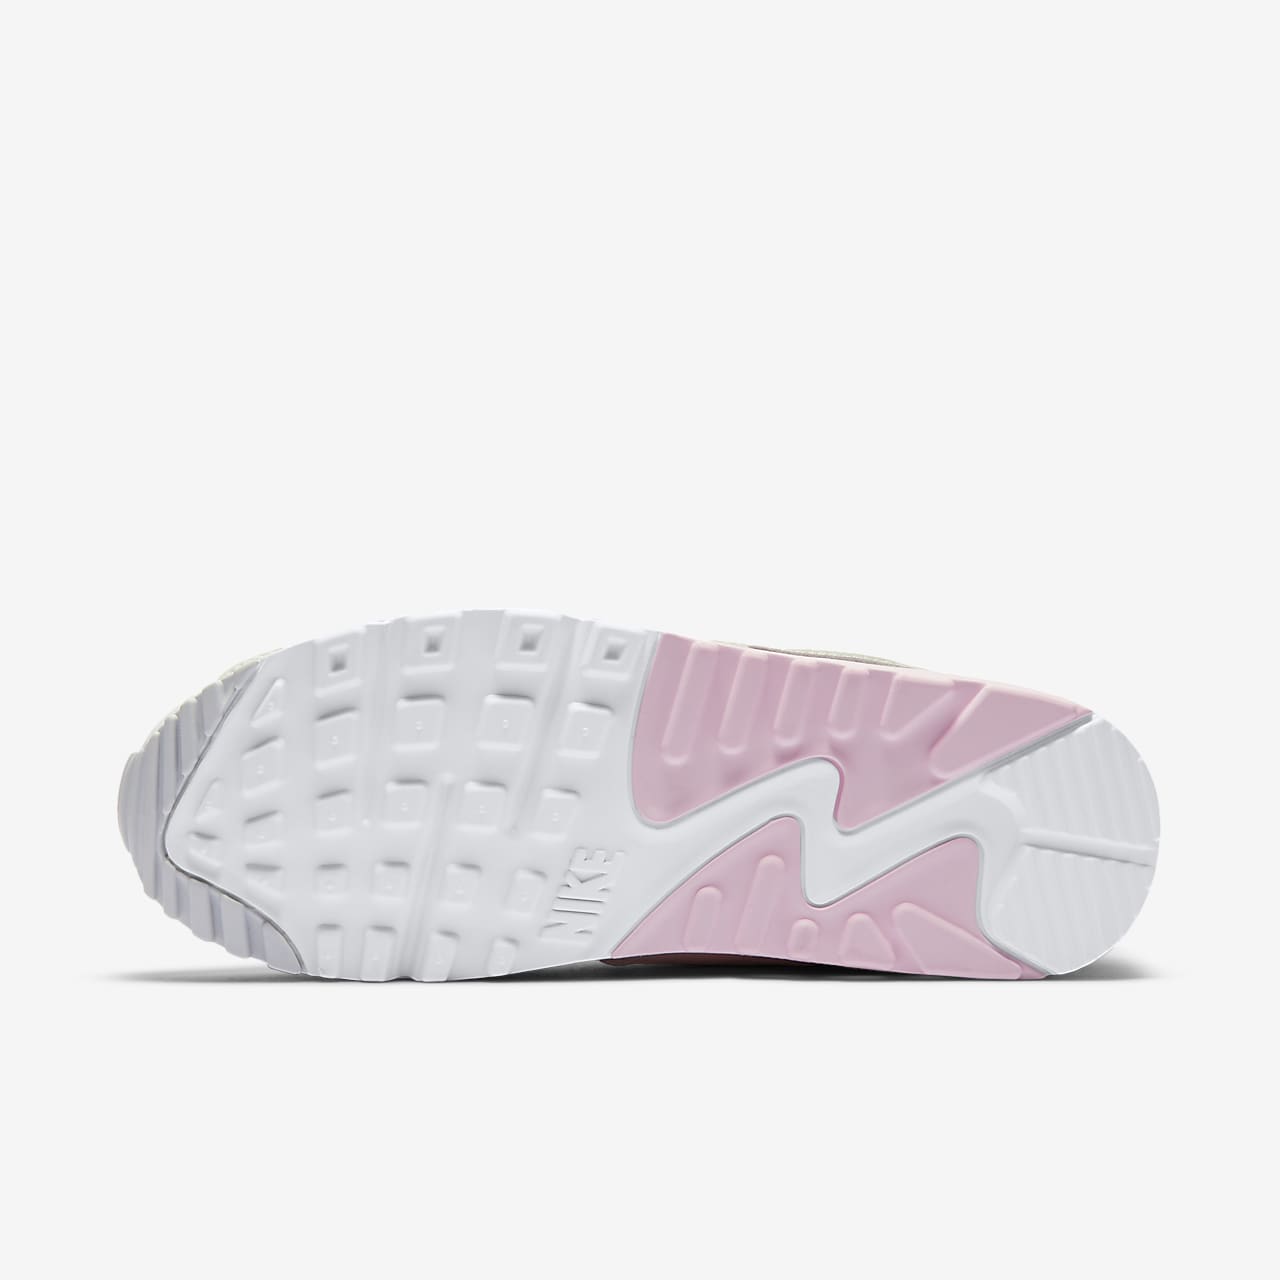 nike air max 90 white and pink sneakers